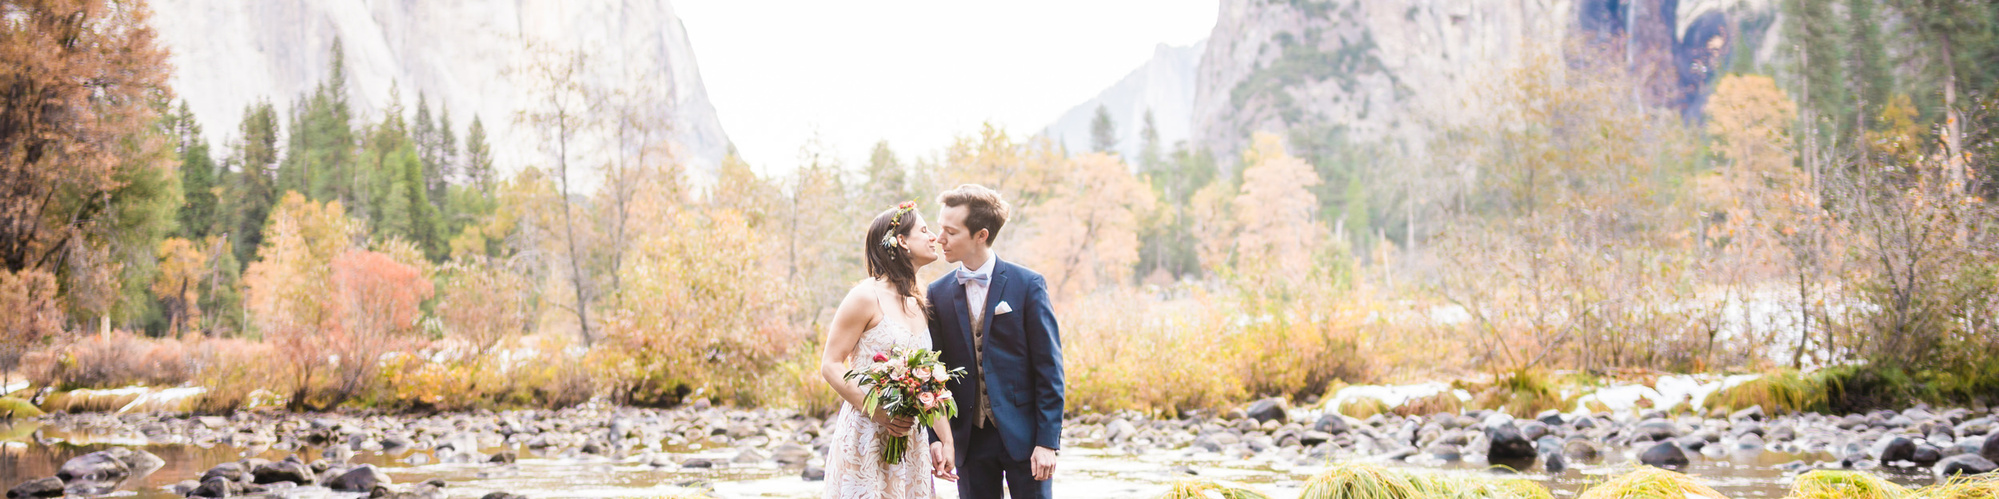 A bride and groom lean in towards each other for a sunrise kiss in Yosemite valley, the granite walls of the Valley rising behind them in the distance